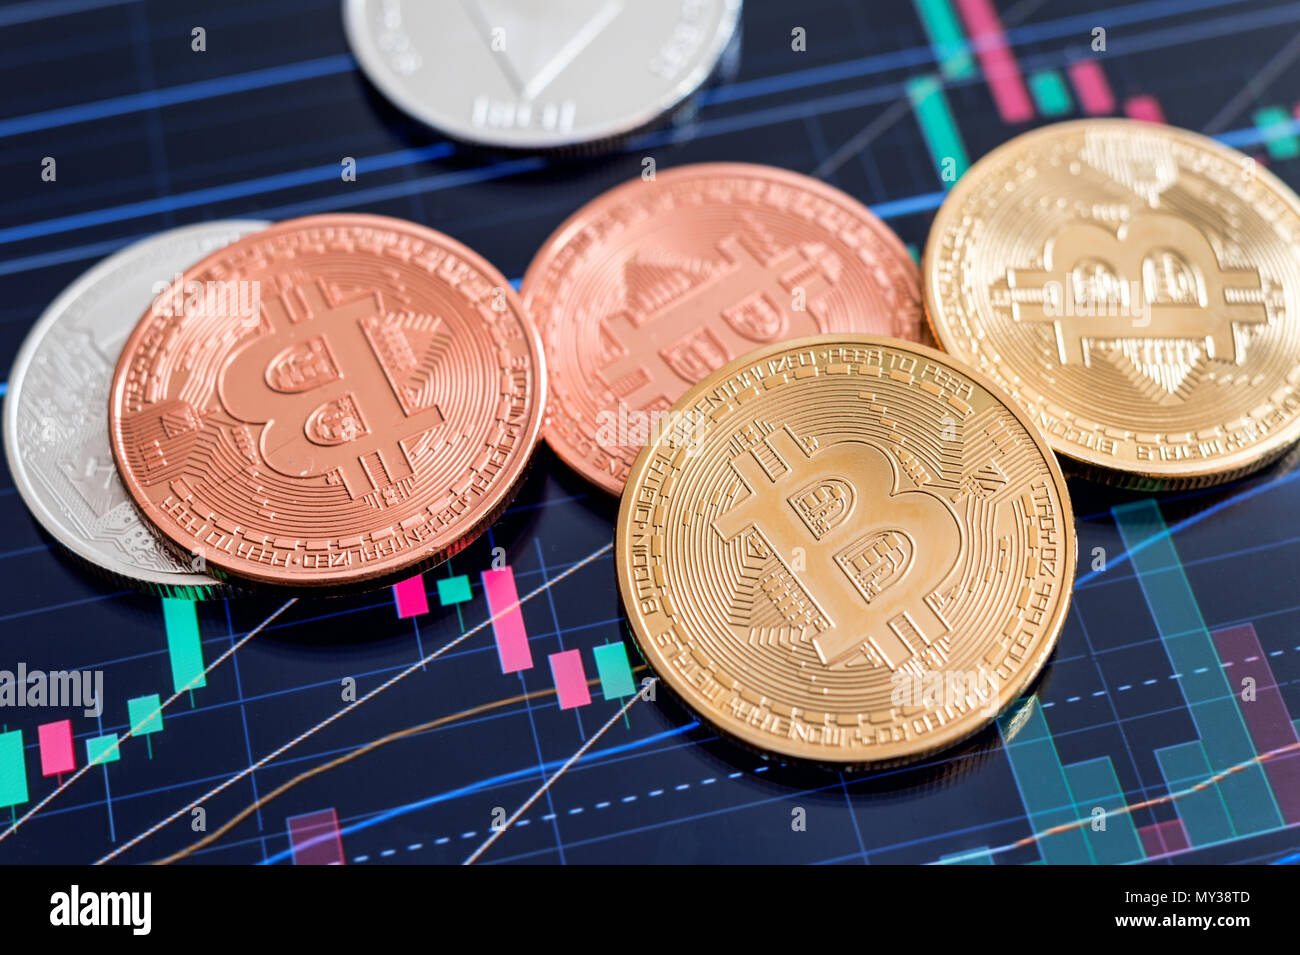 Cryptocurrency Bitcoin coins over tablet screen showing candlestick chart. Stock Photo